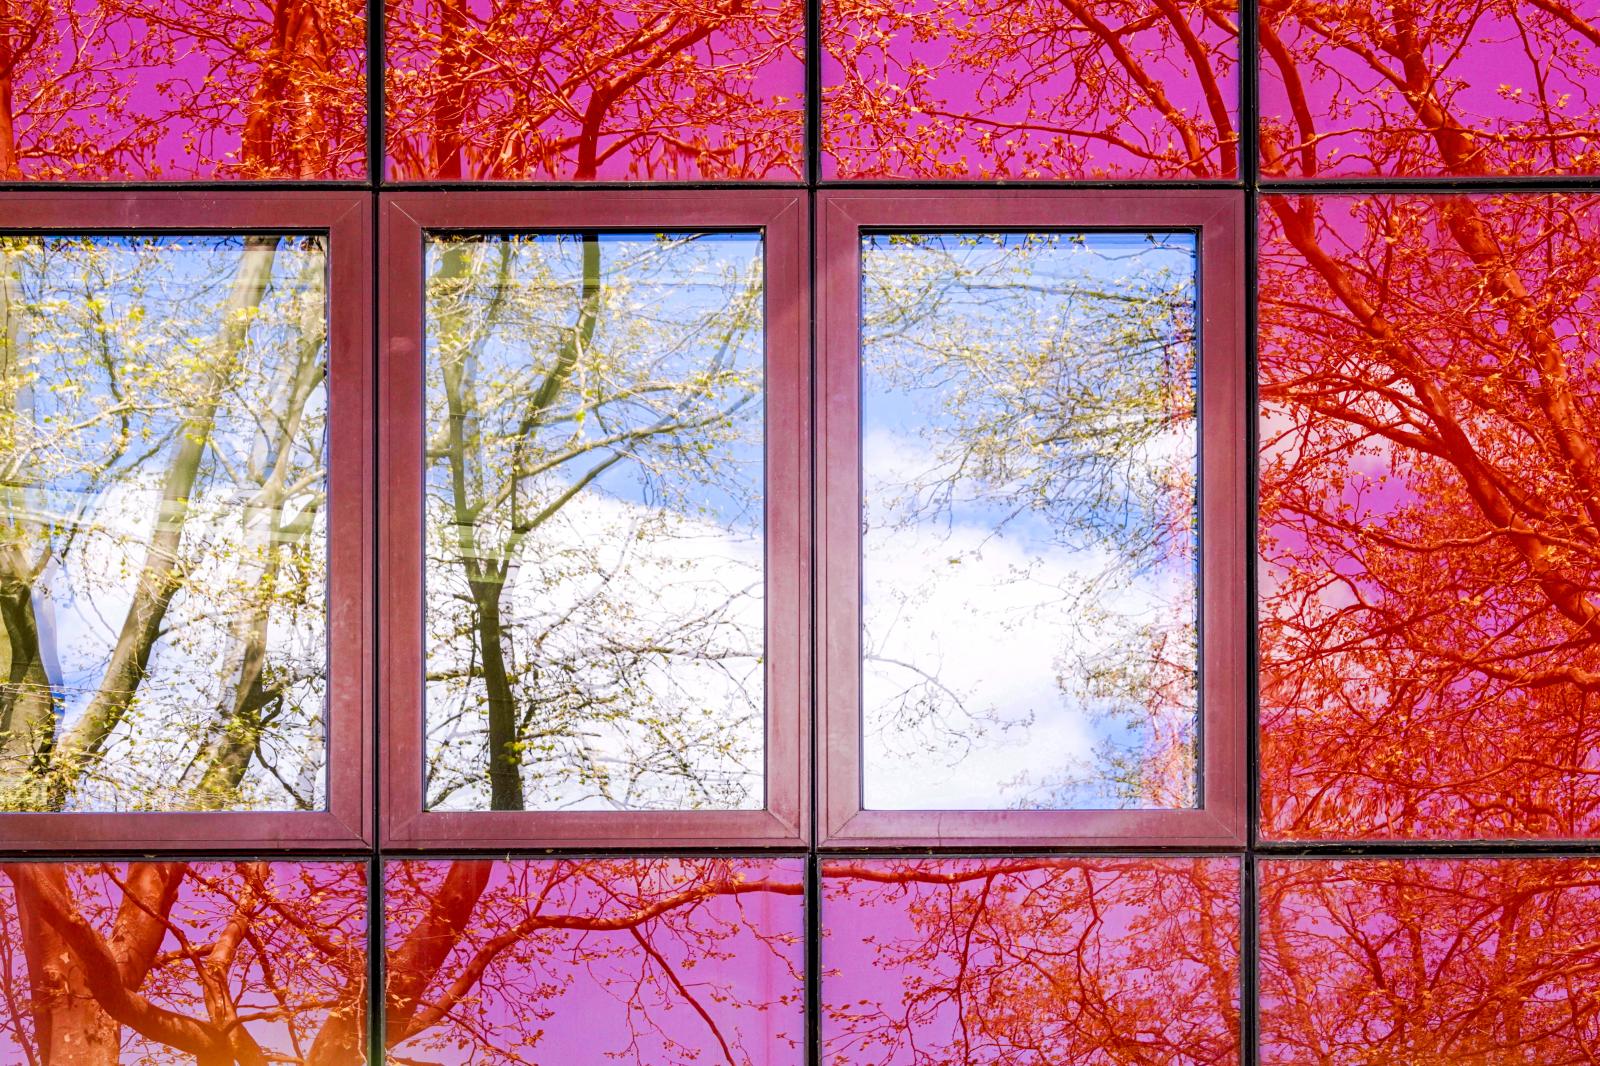 Crimson Reflections: Artful Juxtaposition of Nature against Modernity | Buy this image